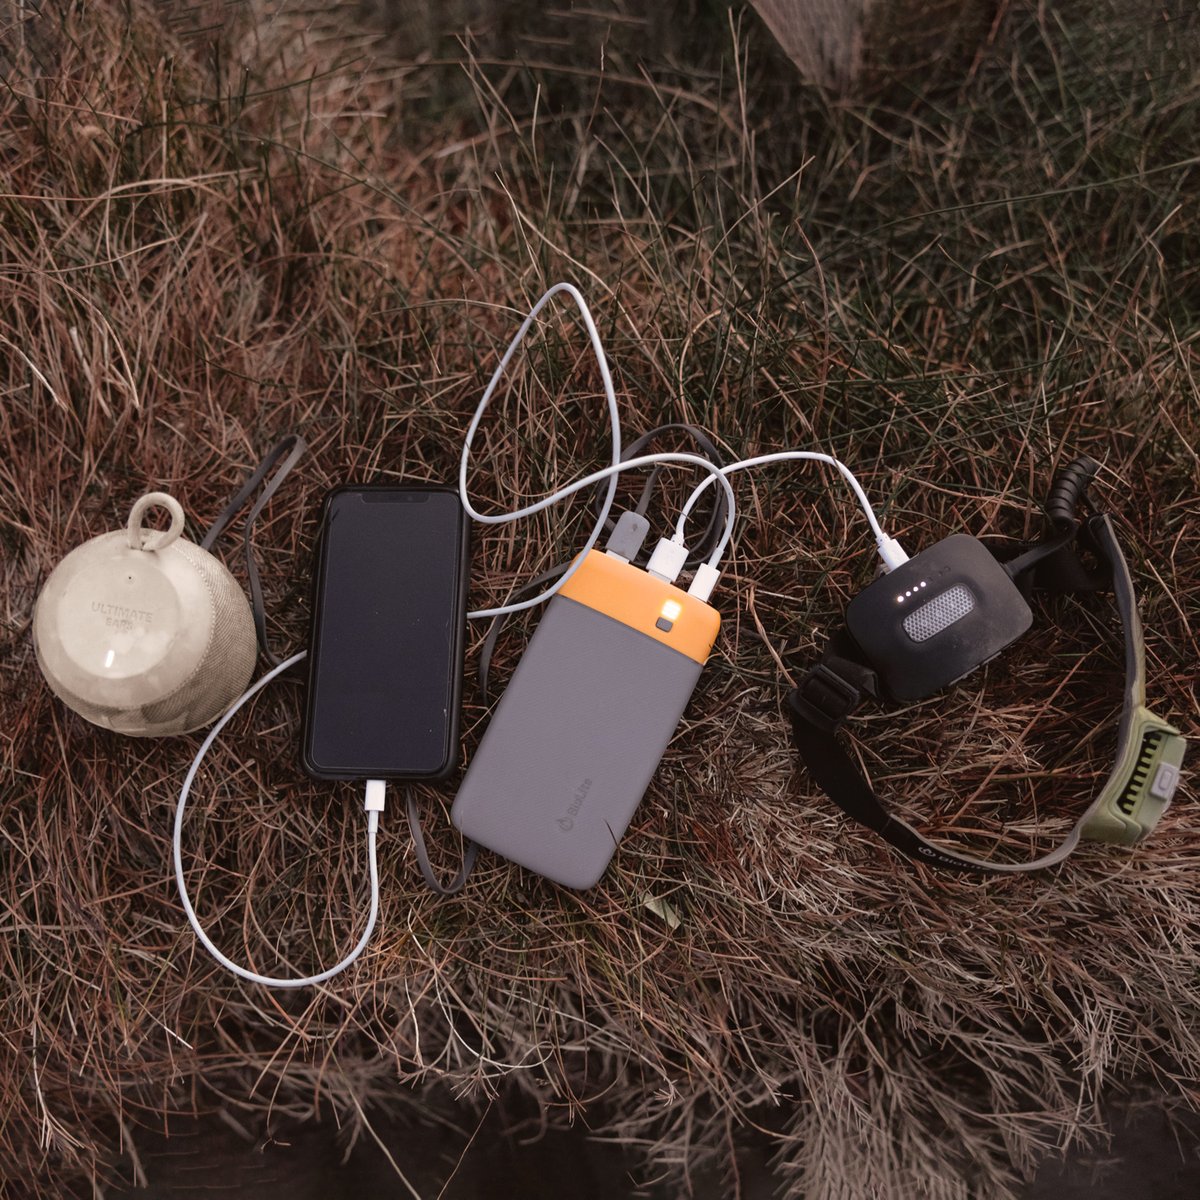 BioLite Charge 40 PD - Gear For Adventure